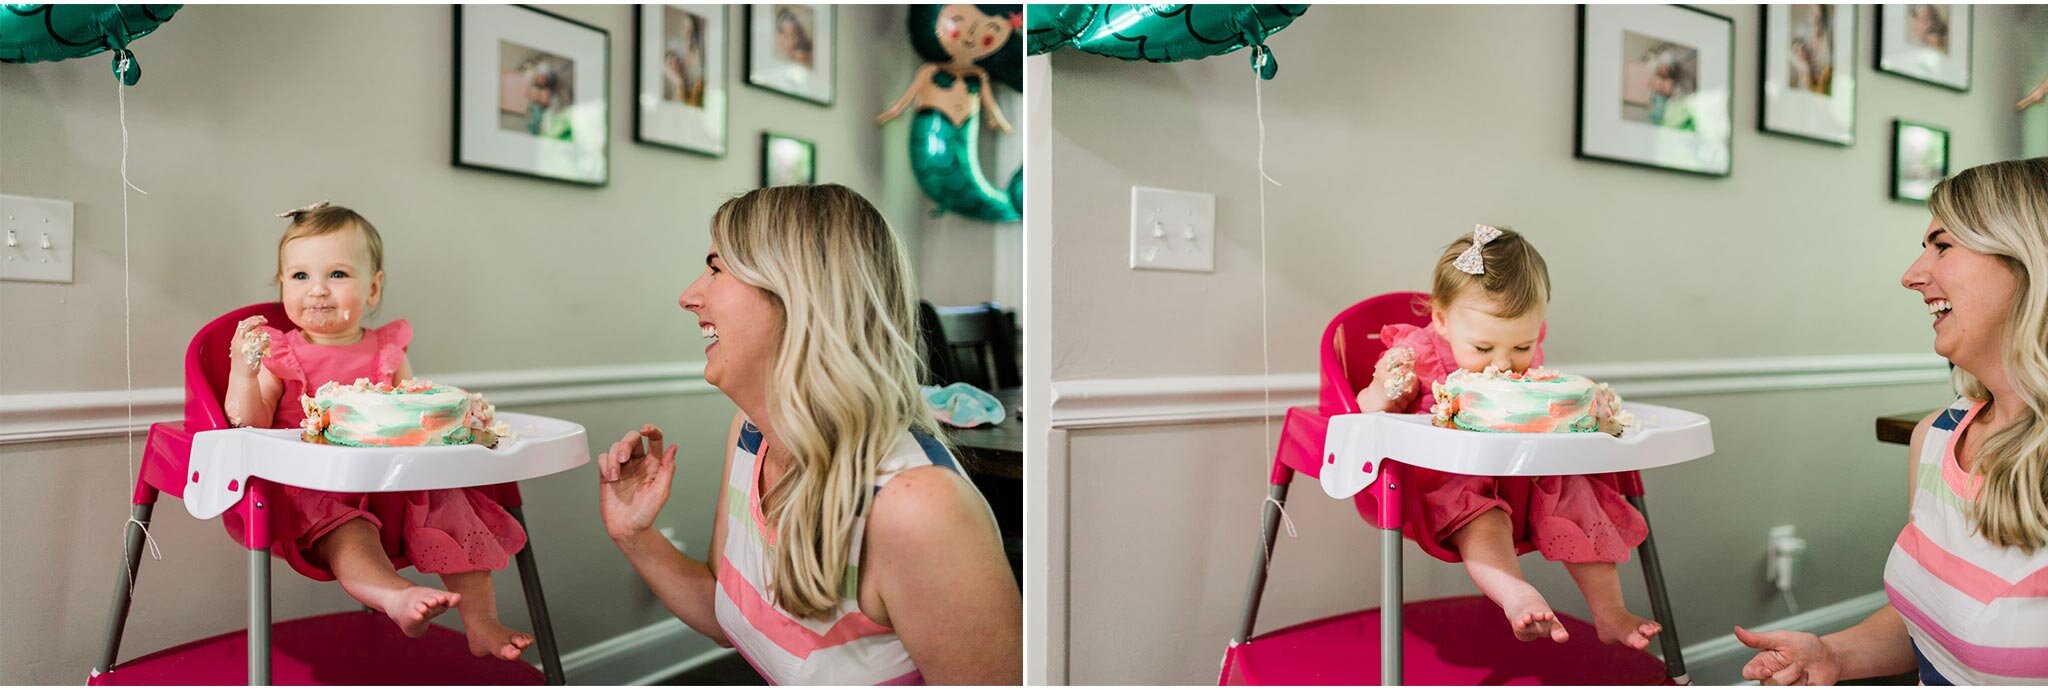 Raleigh Family Photographer | By G. Lin Photography | First birthday party of baby girl